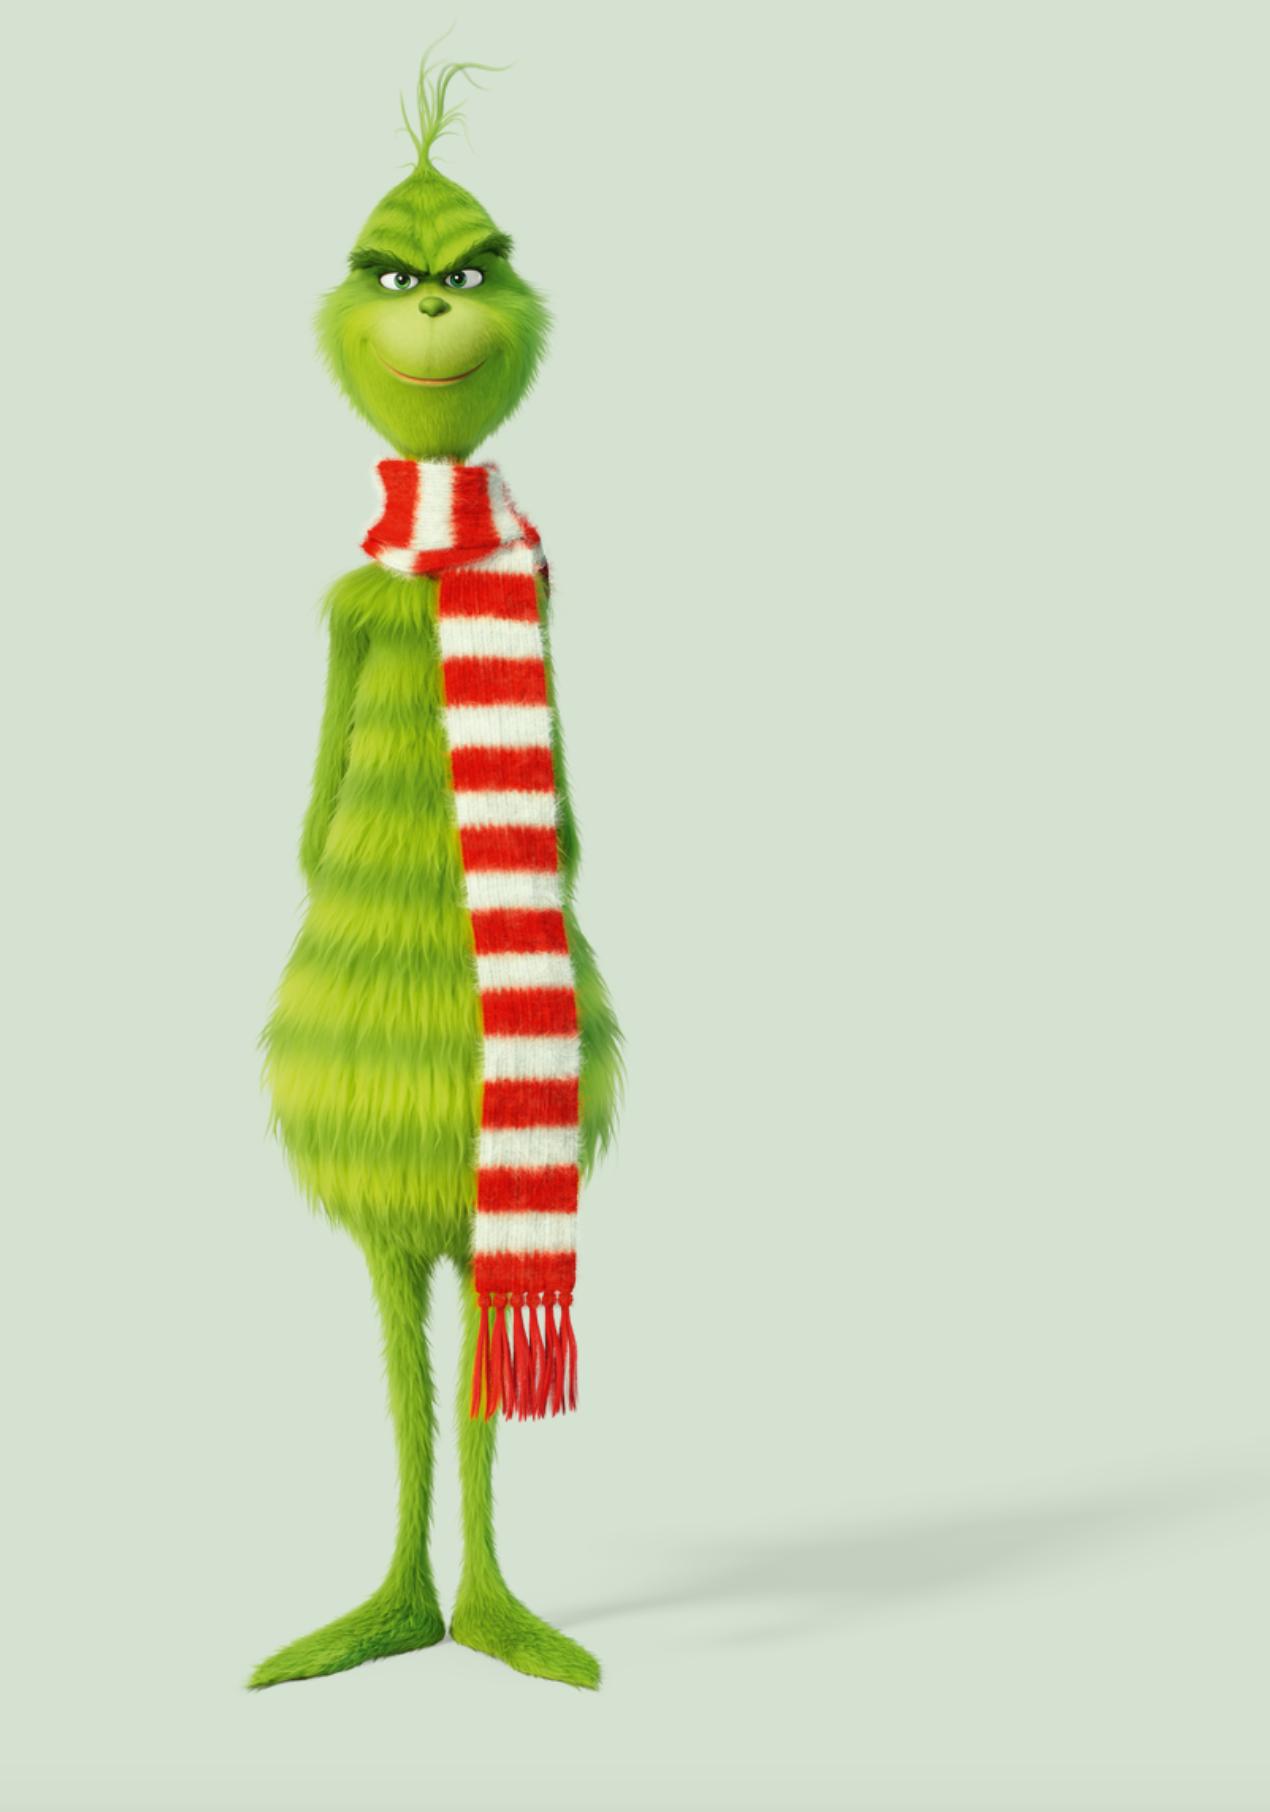 50+ Grinch Wallpaper Iphone Funny 3